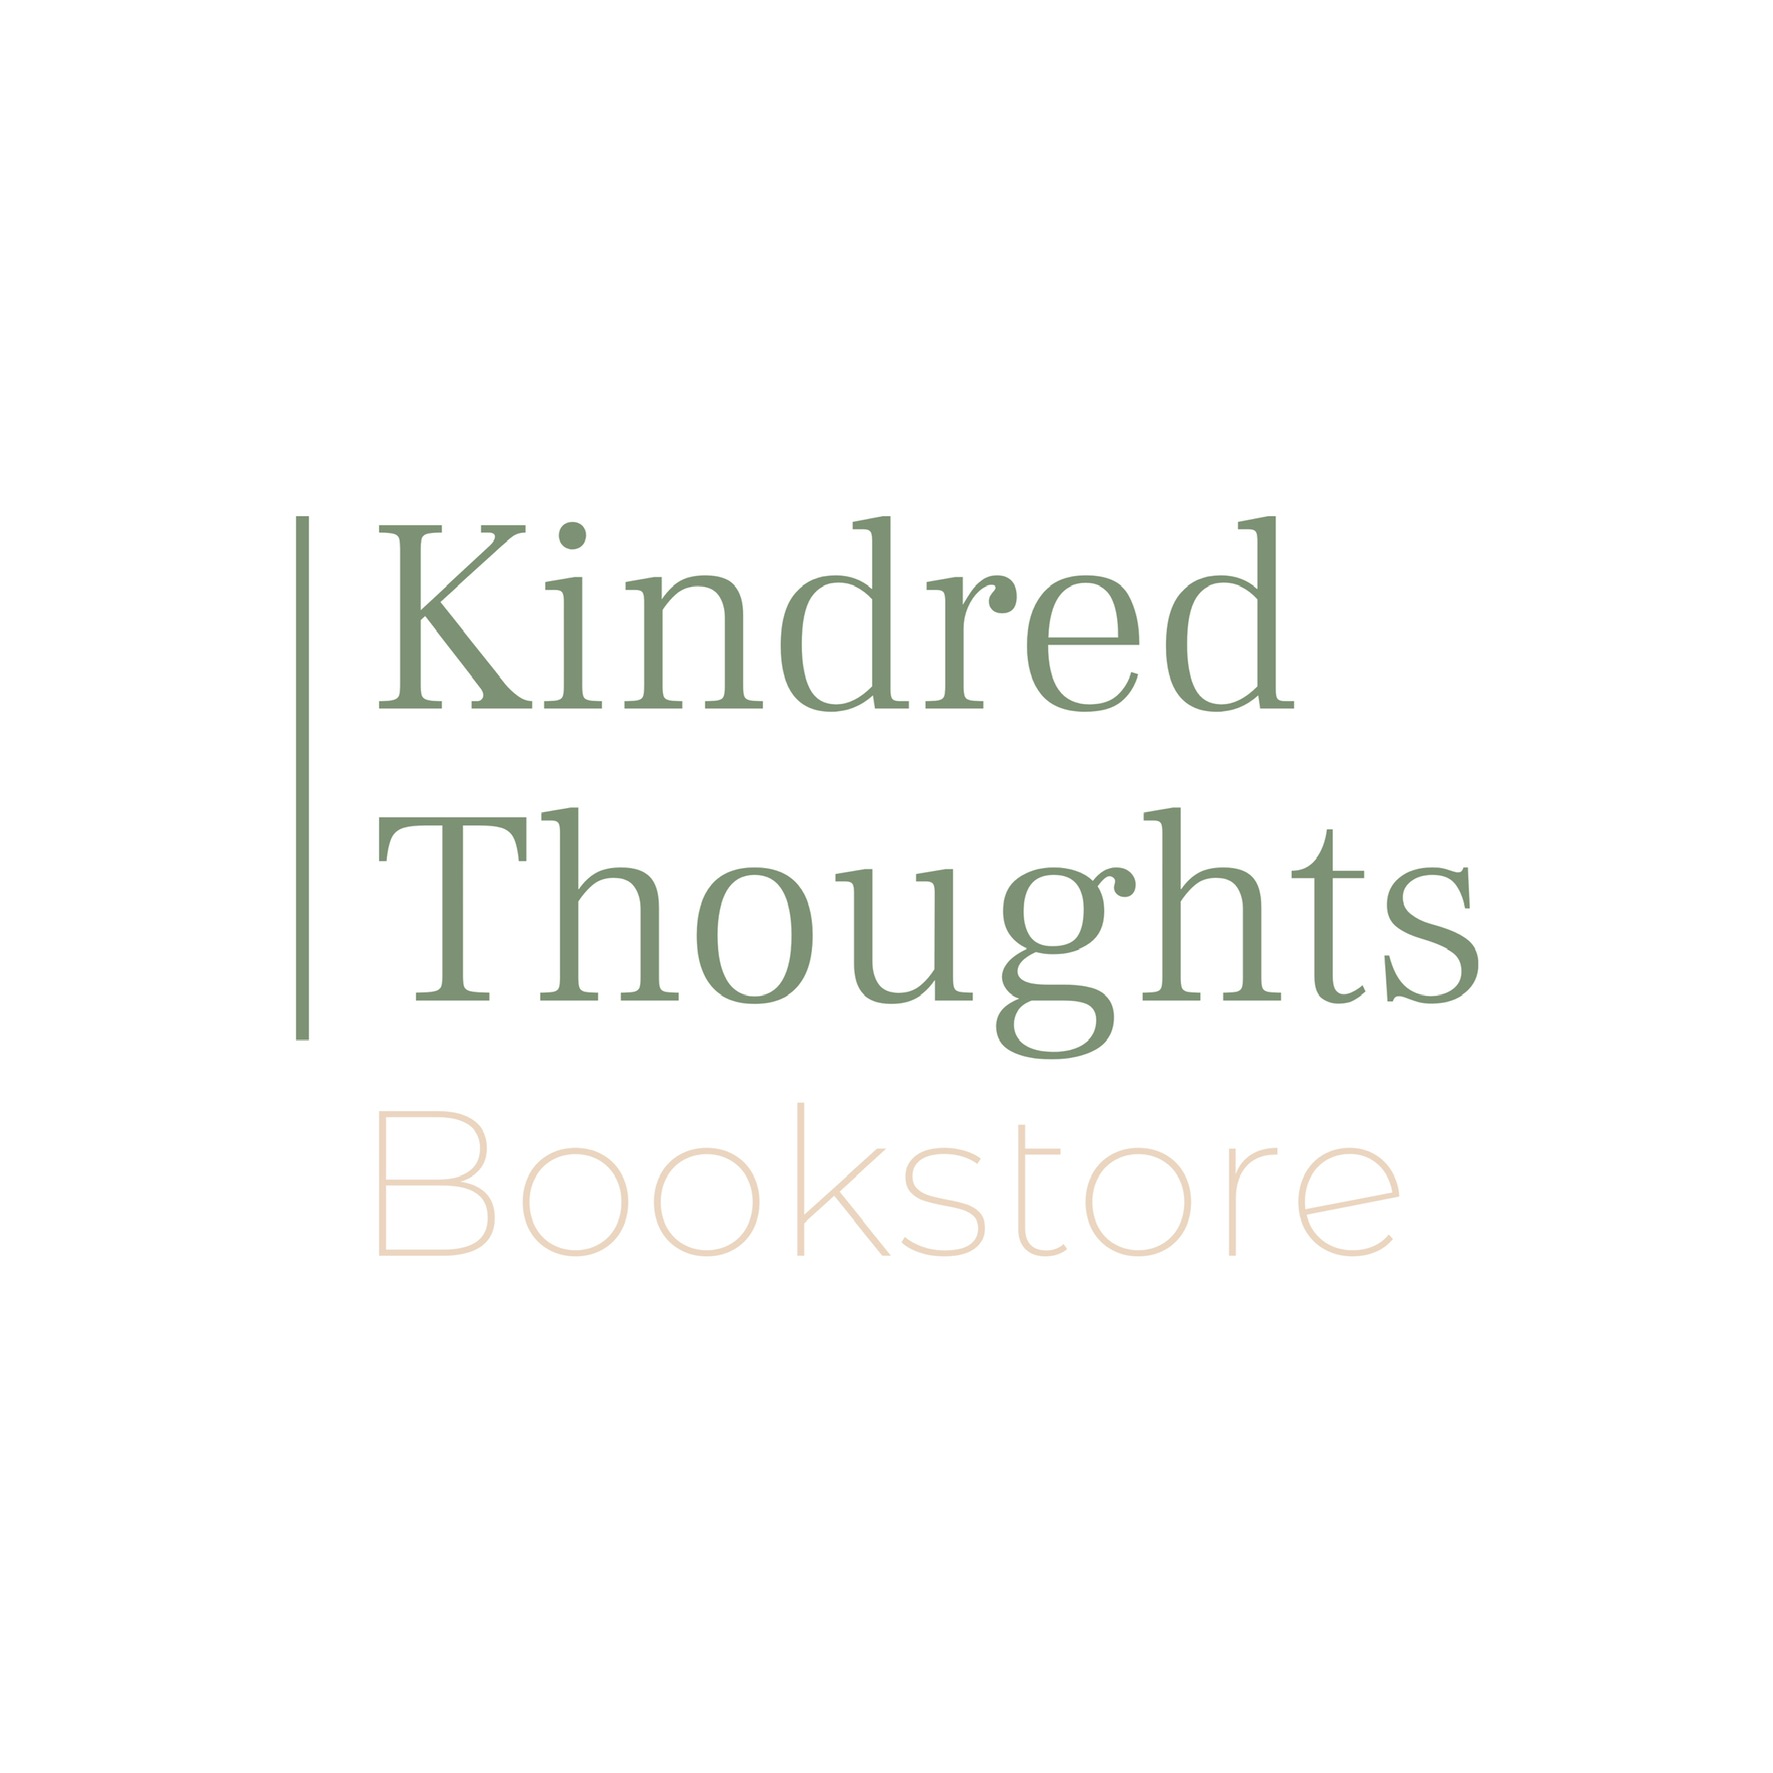 Kindred Thoughts Bookstore